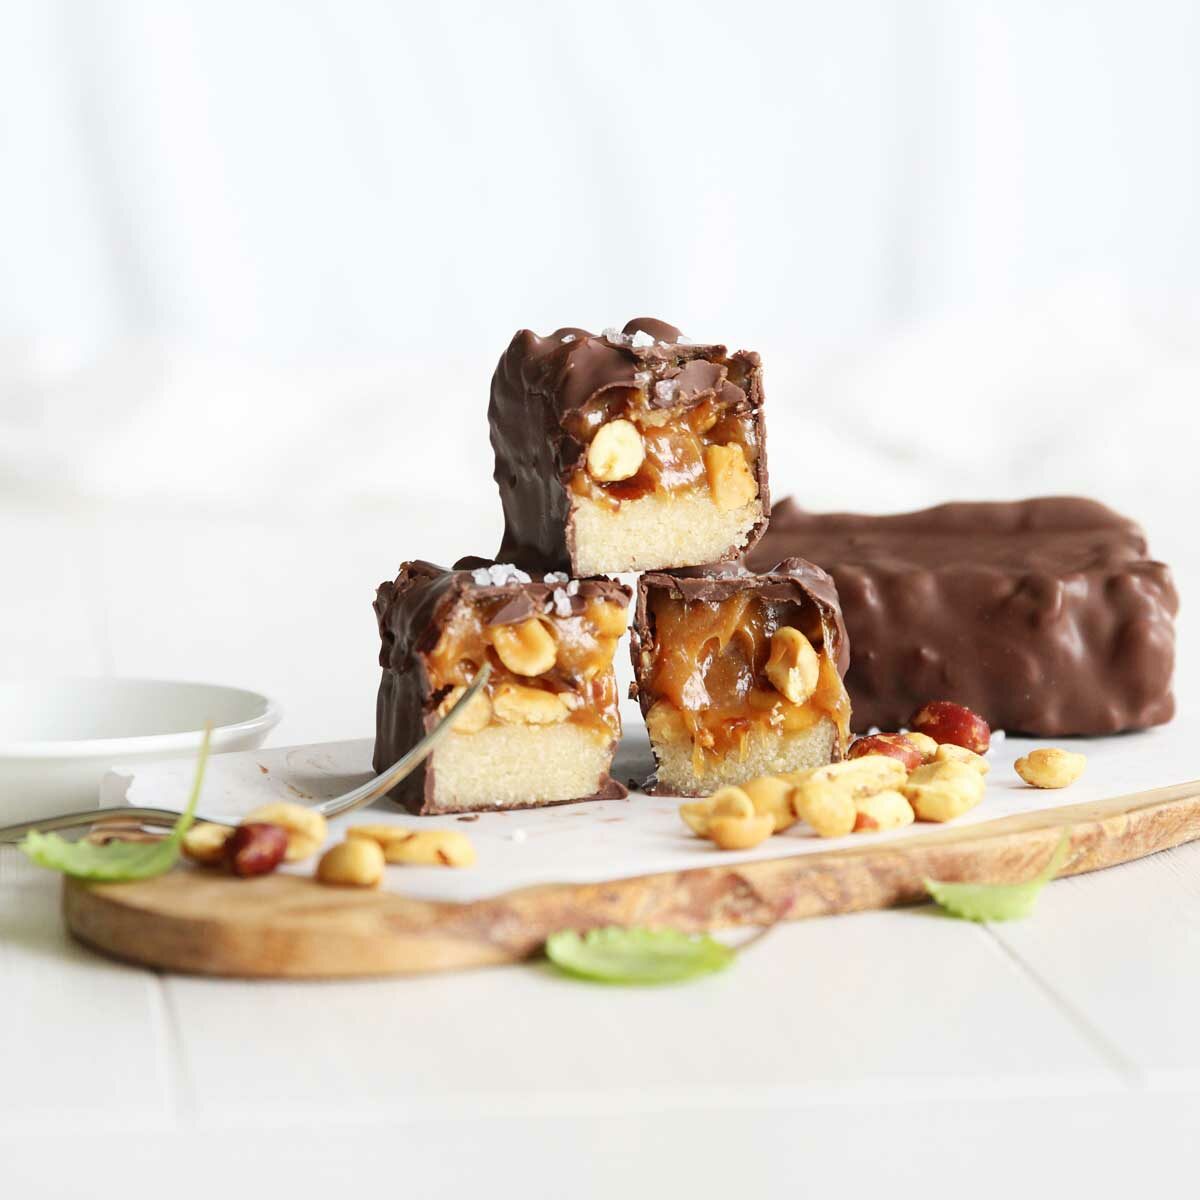 Keto Snickers Protein Bars made with Collagen Peptides Powder